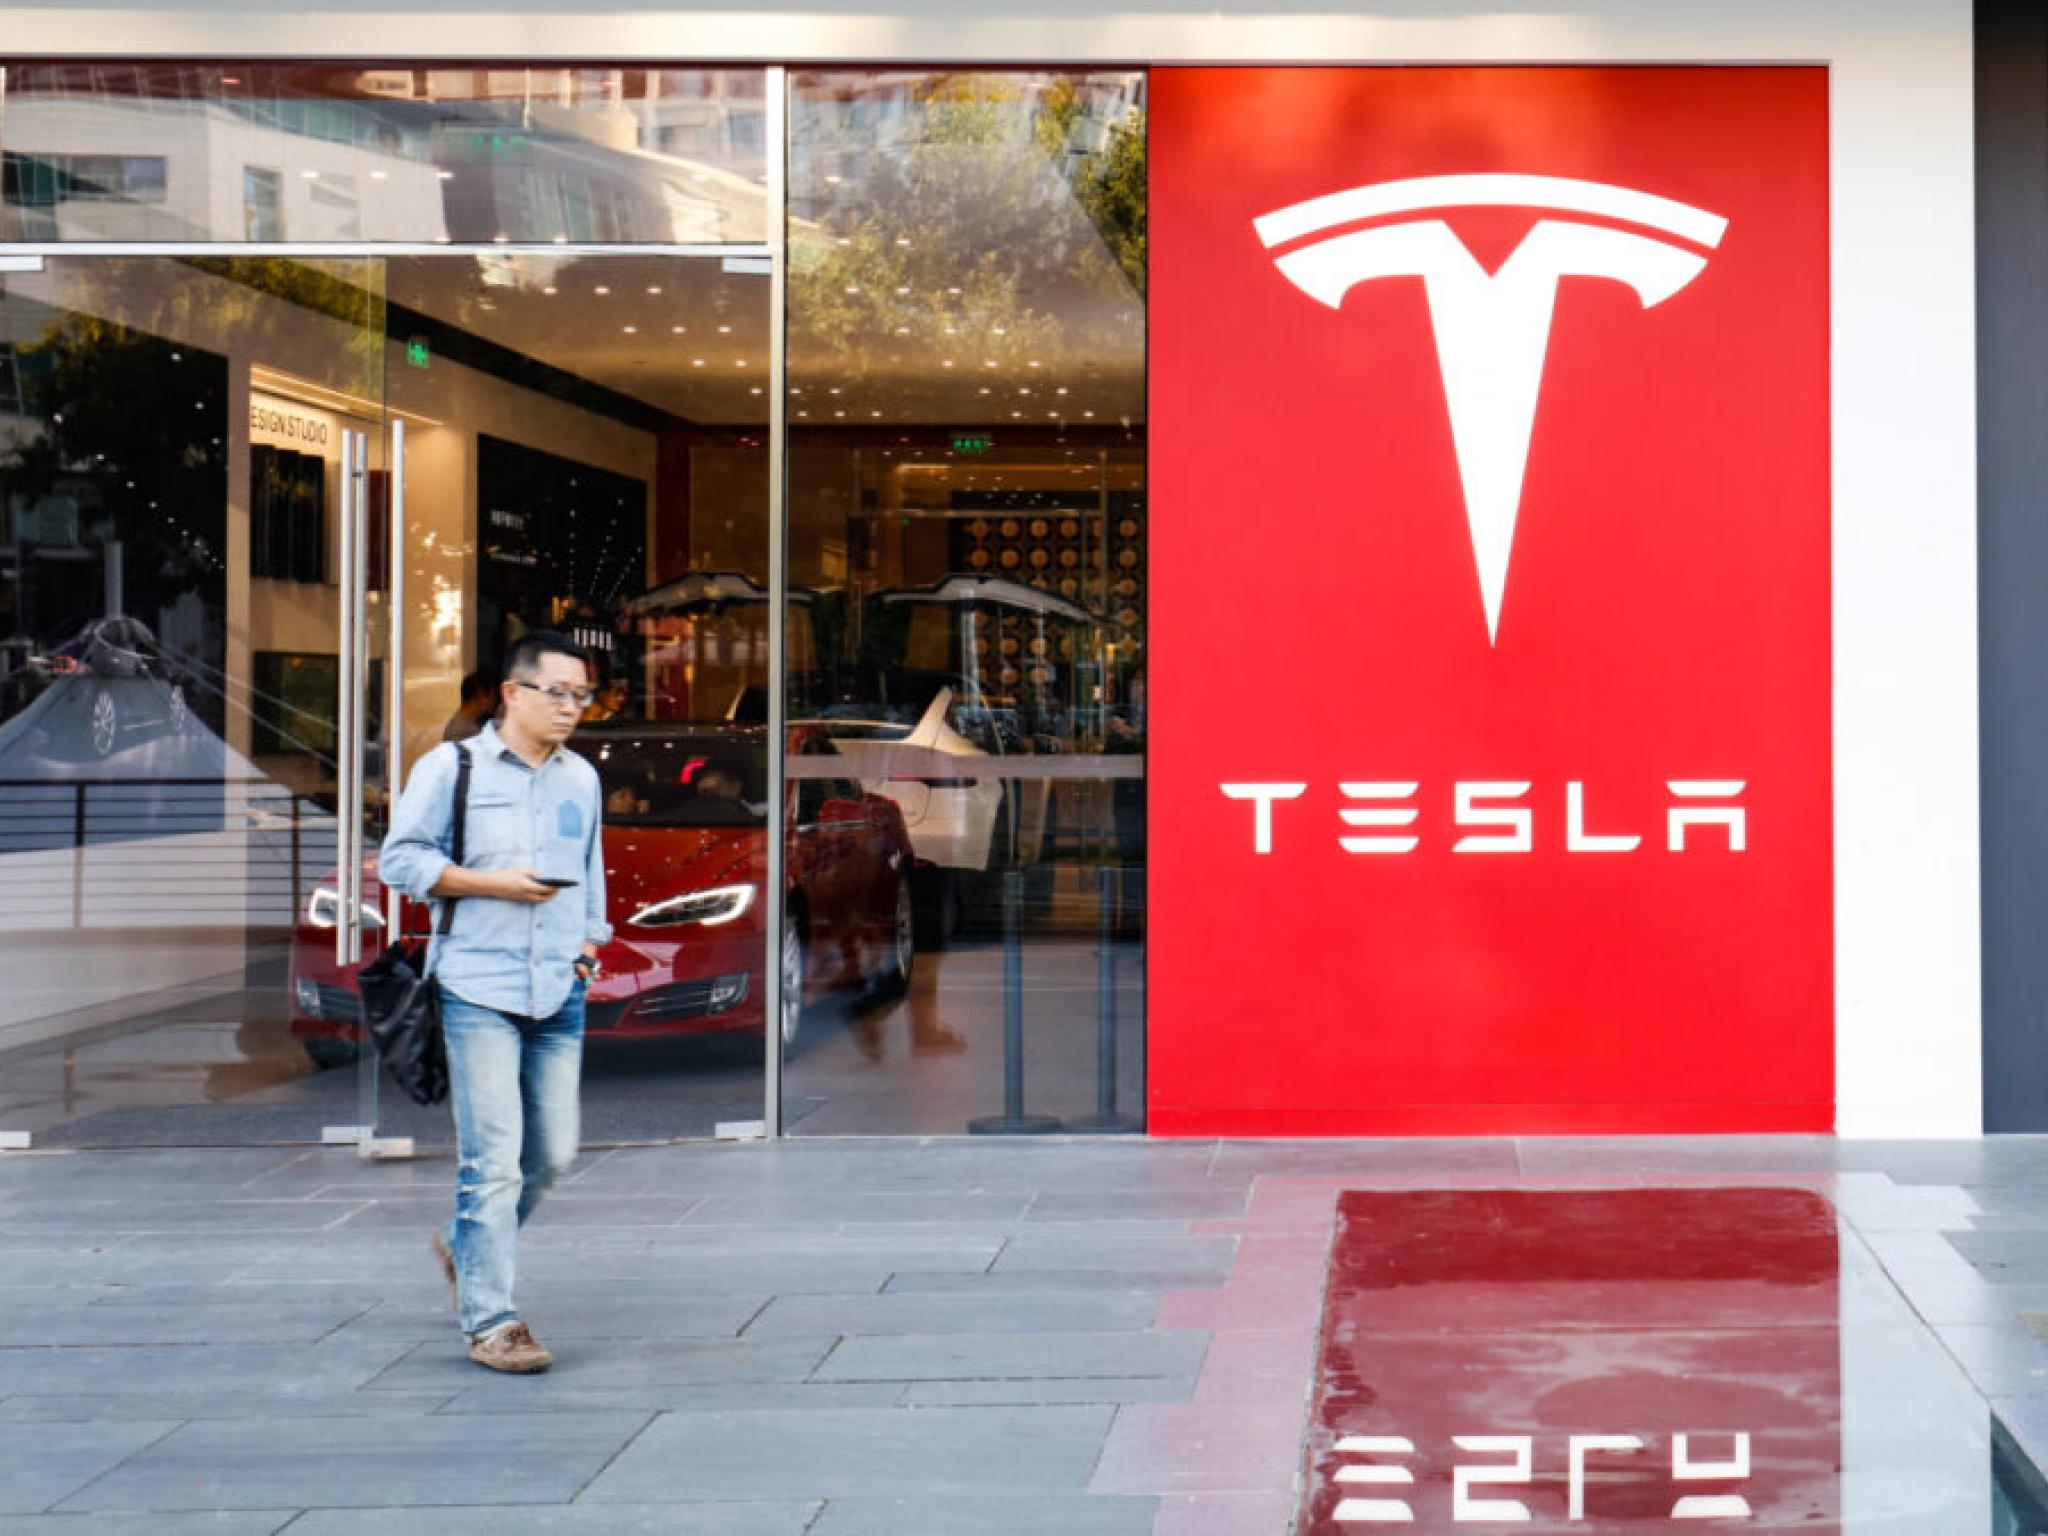  tesla-love-or-hate-it-survey-shows-huge-brand-image-gap-between-owners-and-non-owners 